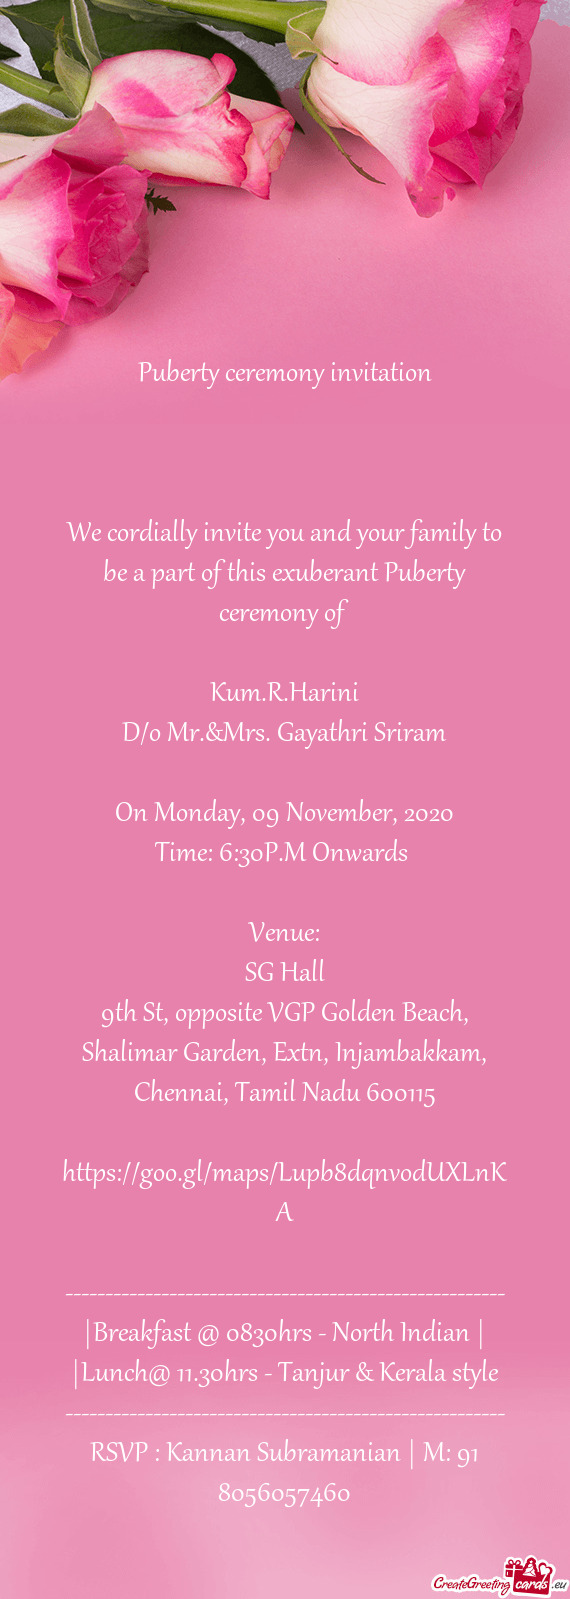 We cordially invite you and your family to be a part of this exuberant Puberty ceremony of